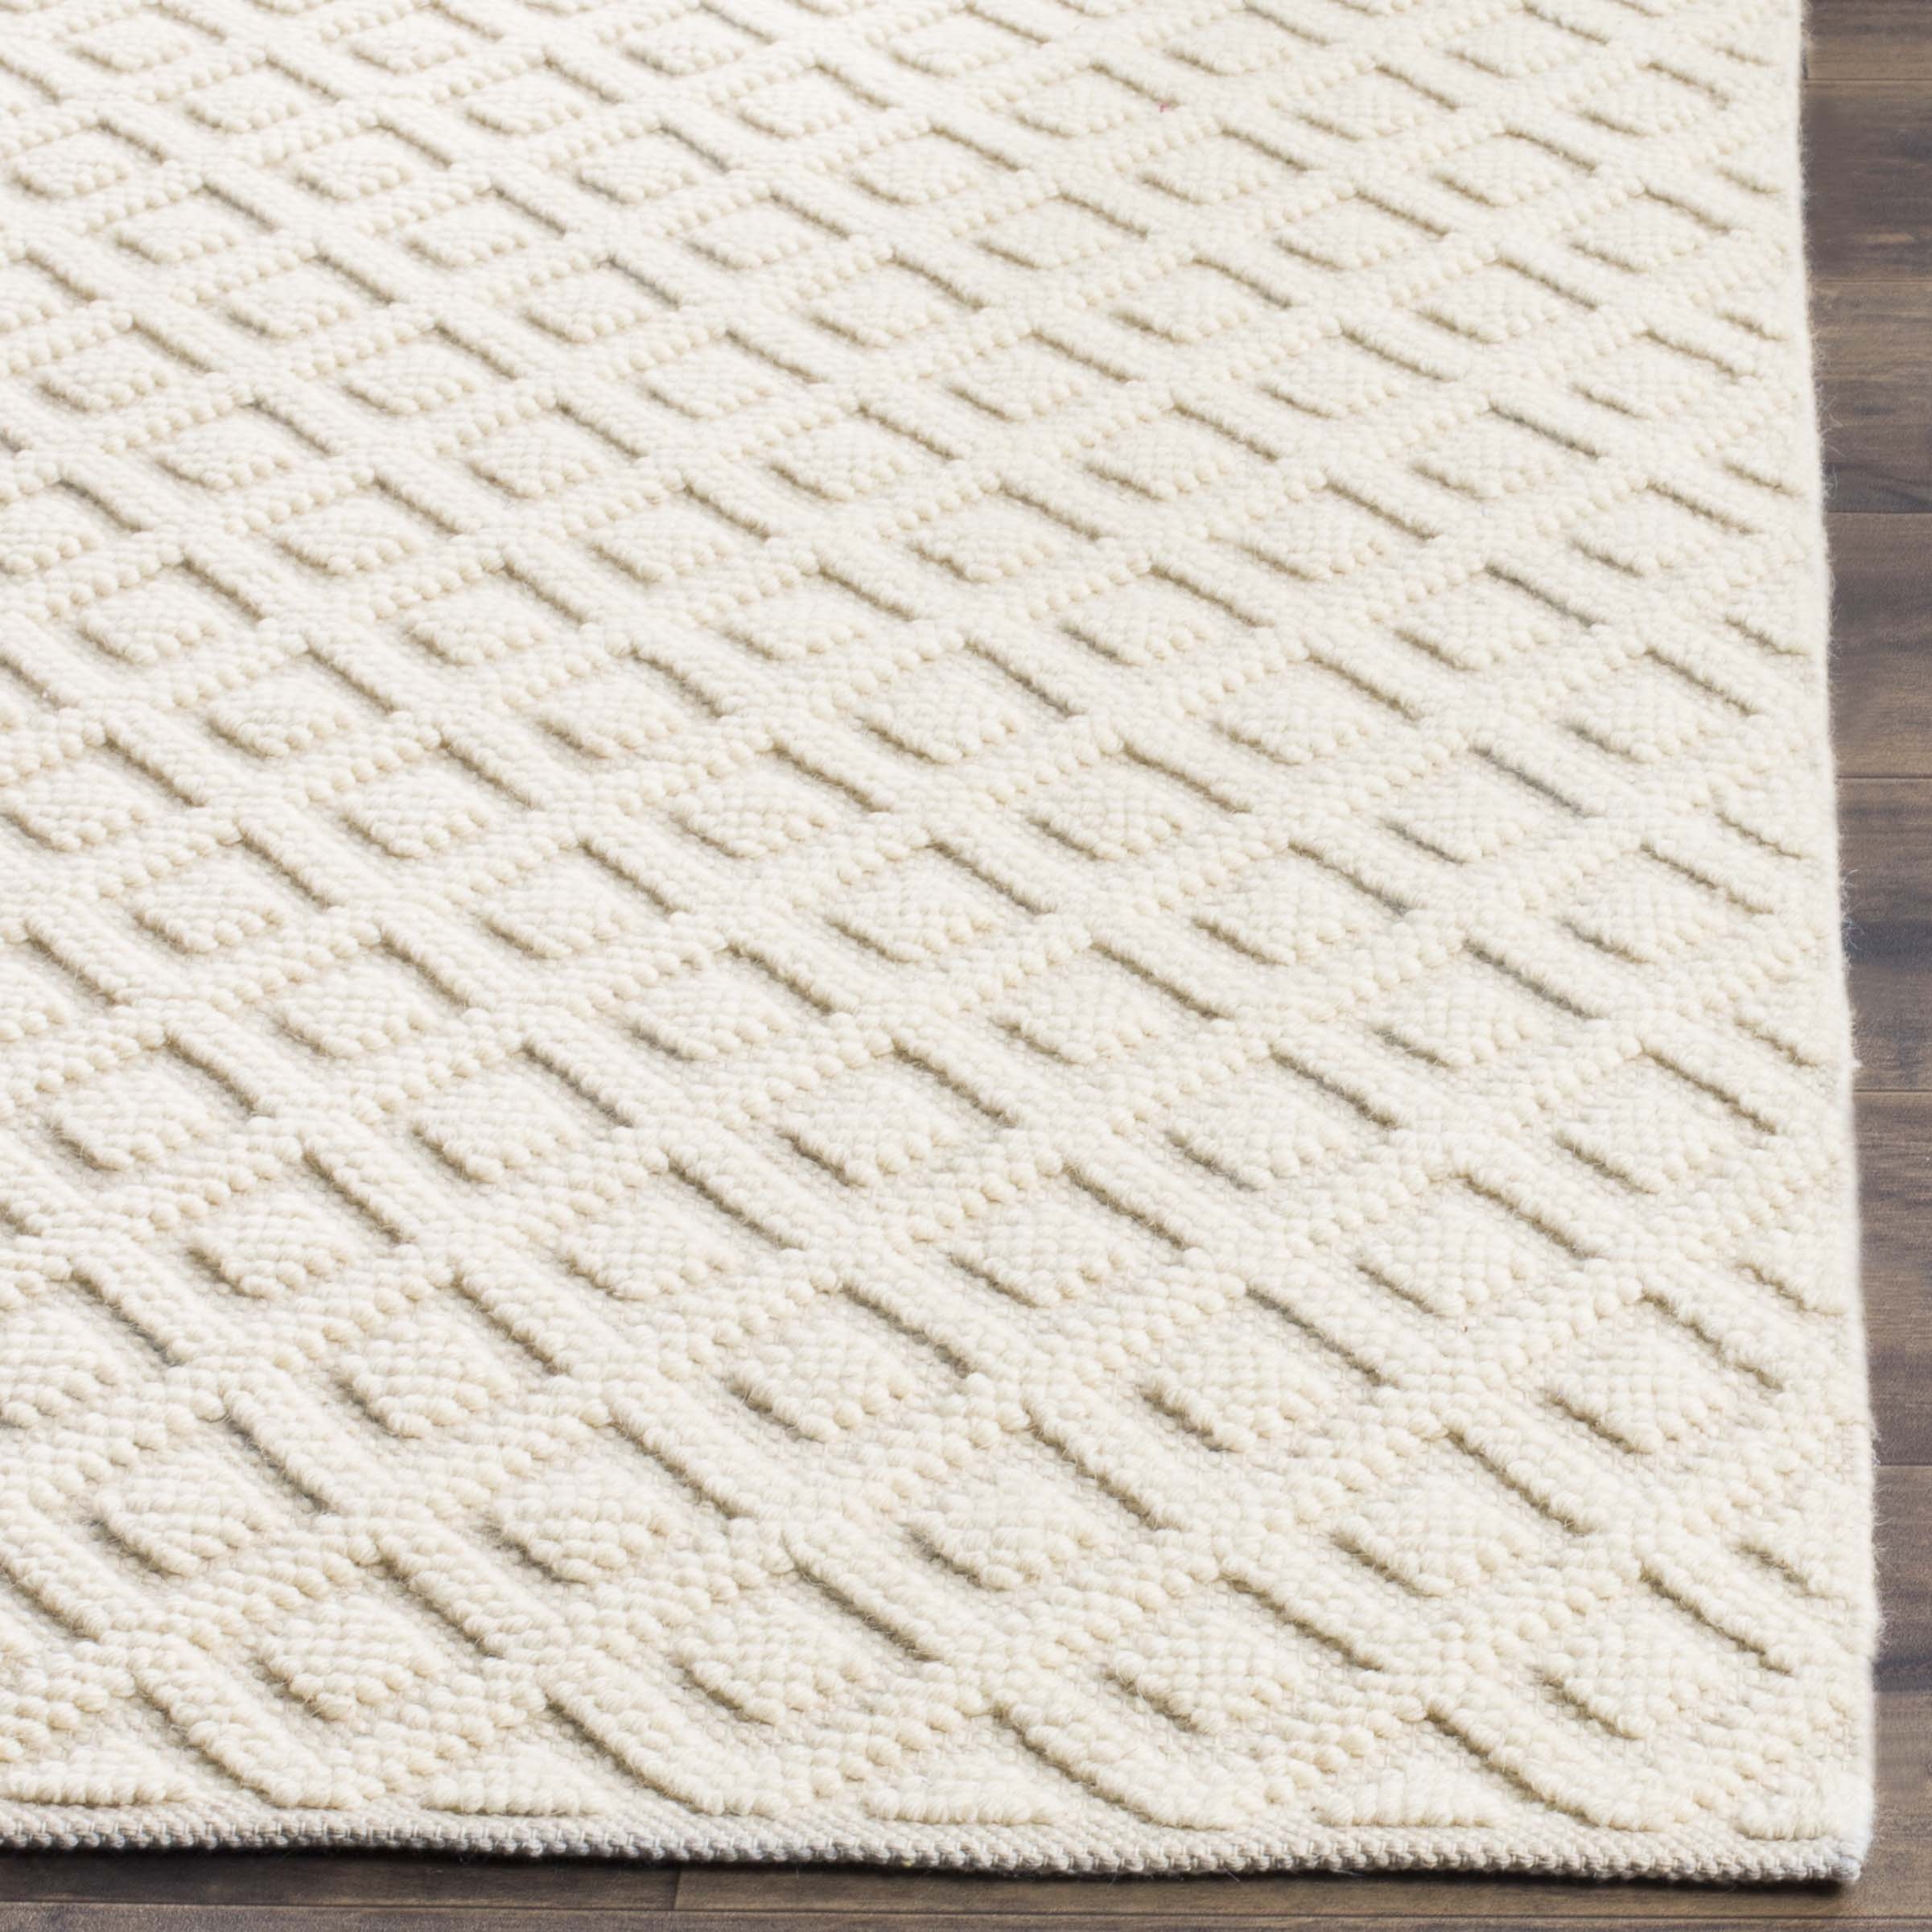 Arlo Home Hand Woven Area Rug, VRM104A, Ivory,  8' X 10' - Image 2